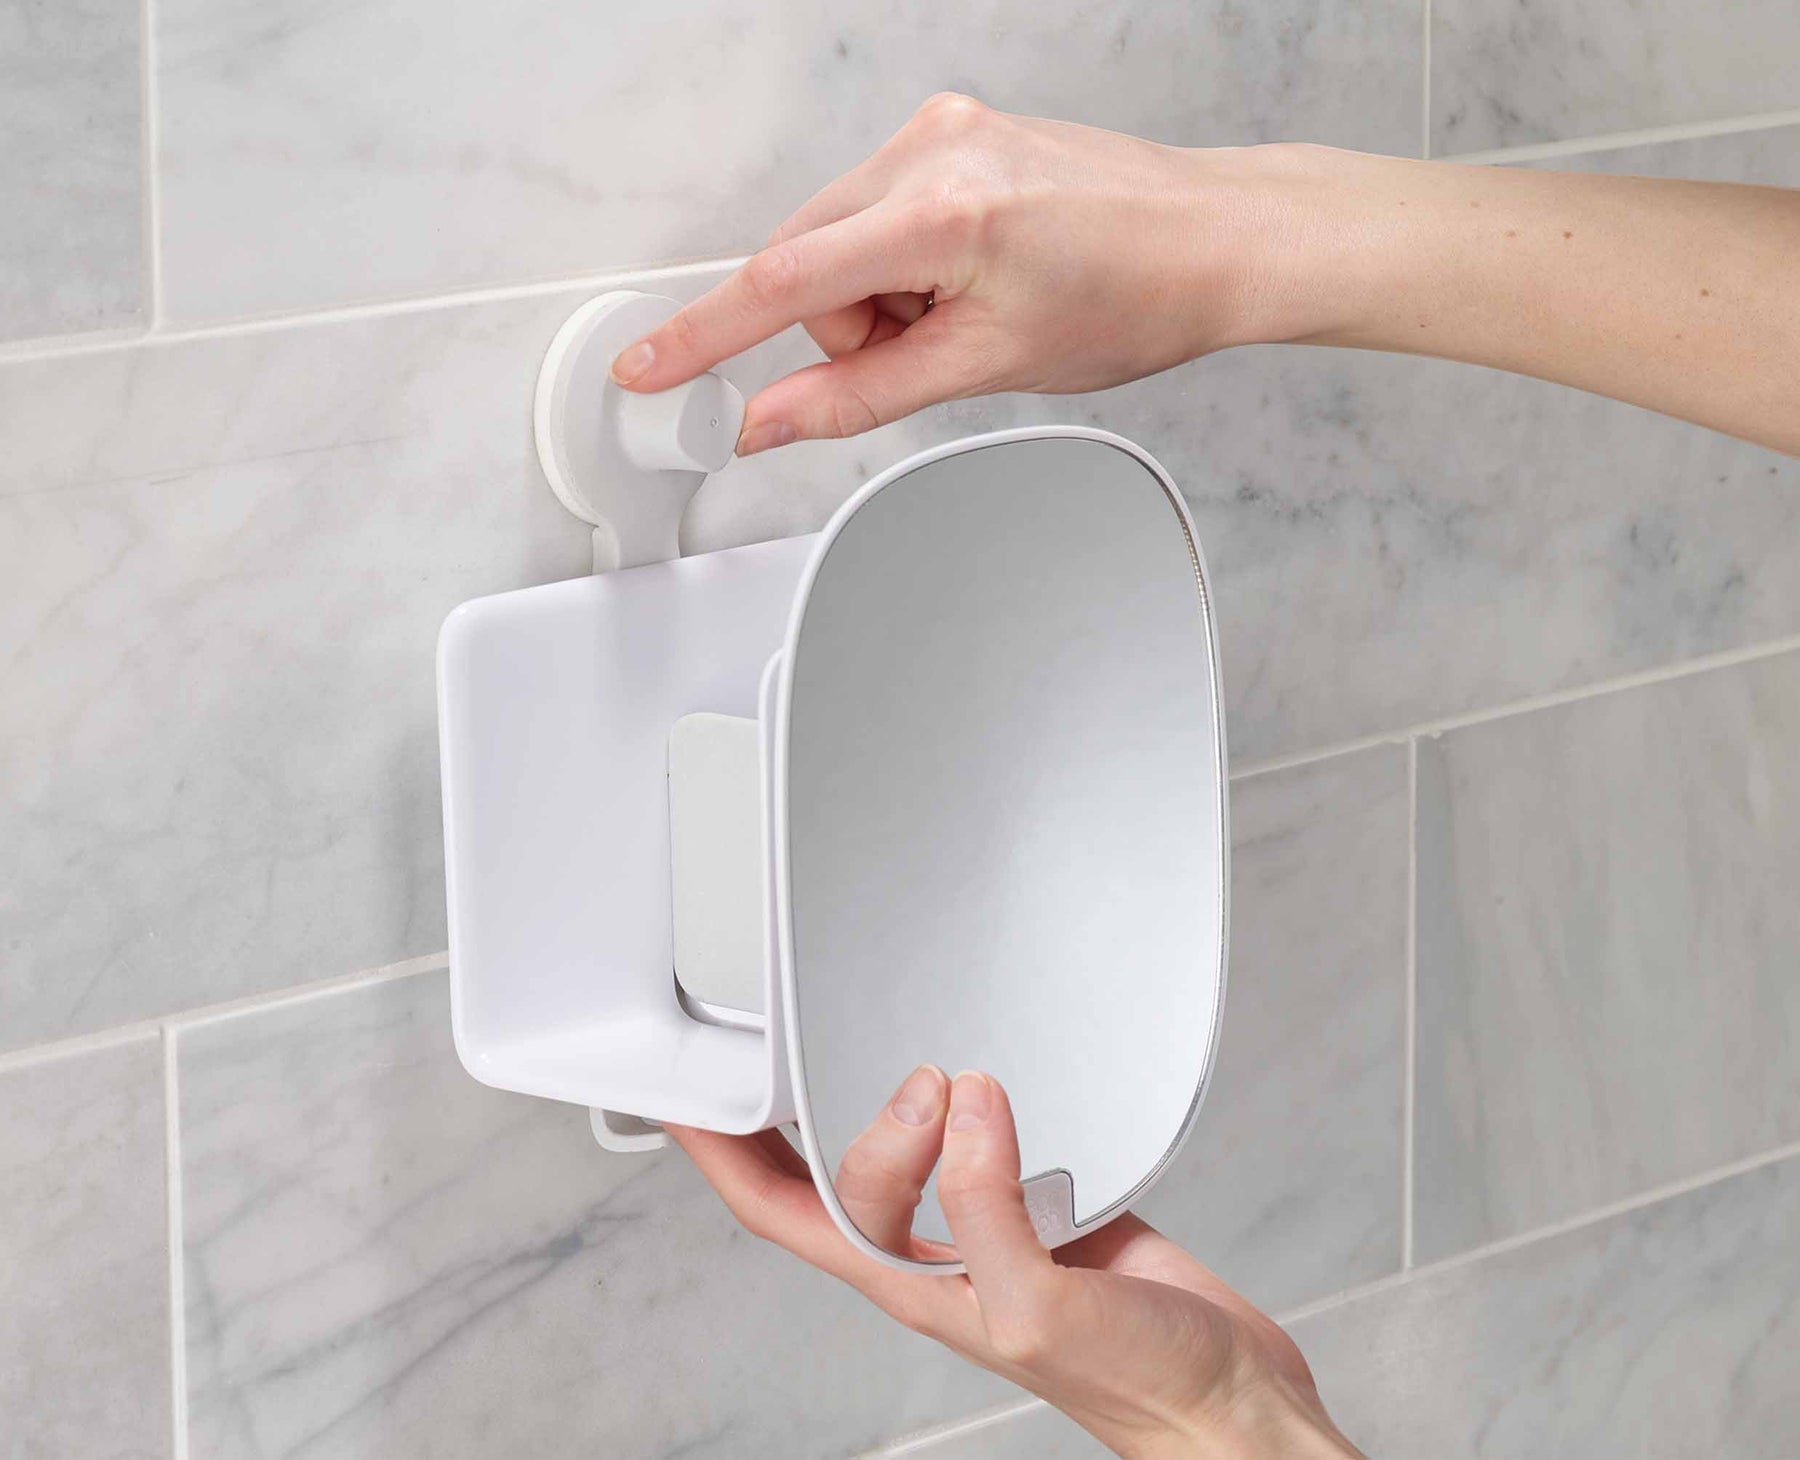 Buy Joseph Joseph EasyStore Compact Suction Mount Shower Caddy Shelf w/ Mirror White at Barbeques Galore.